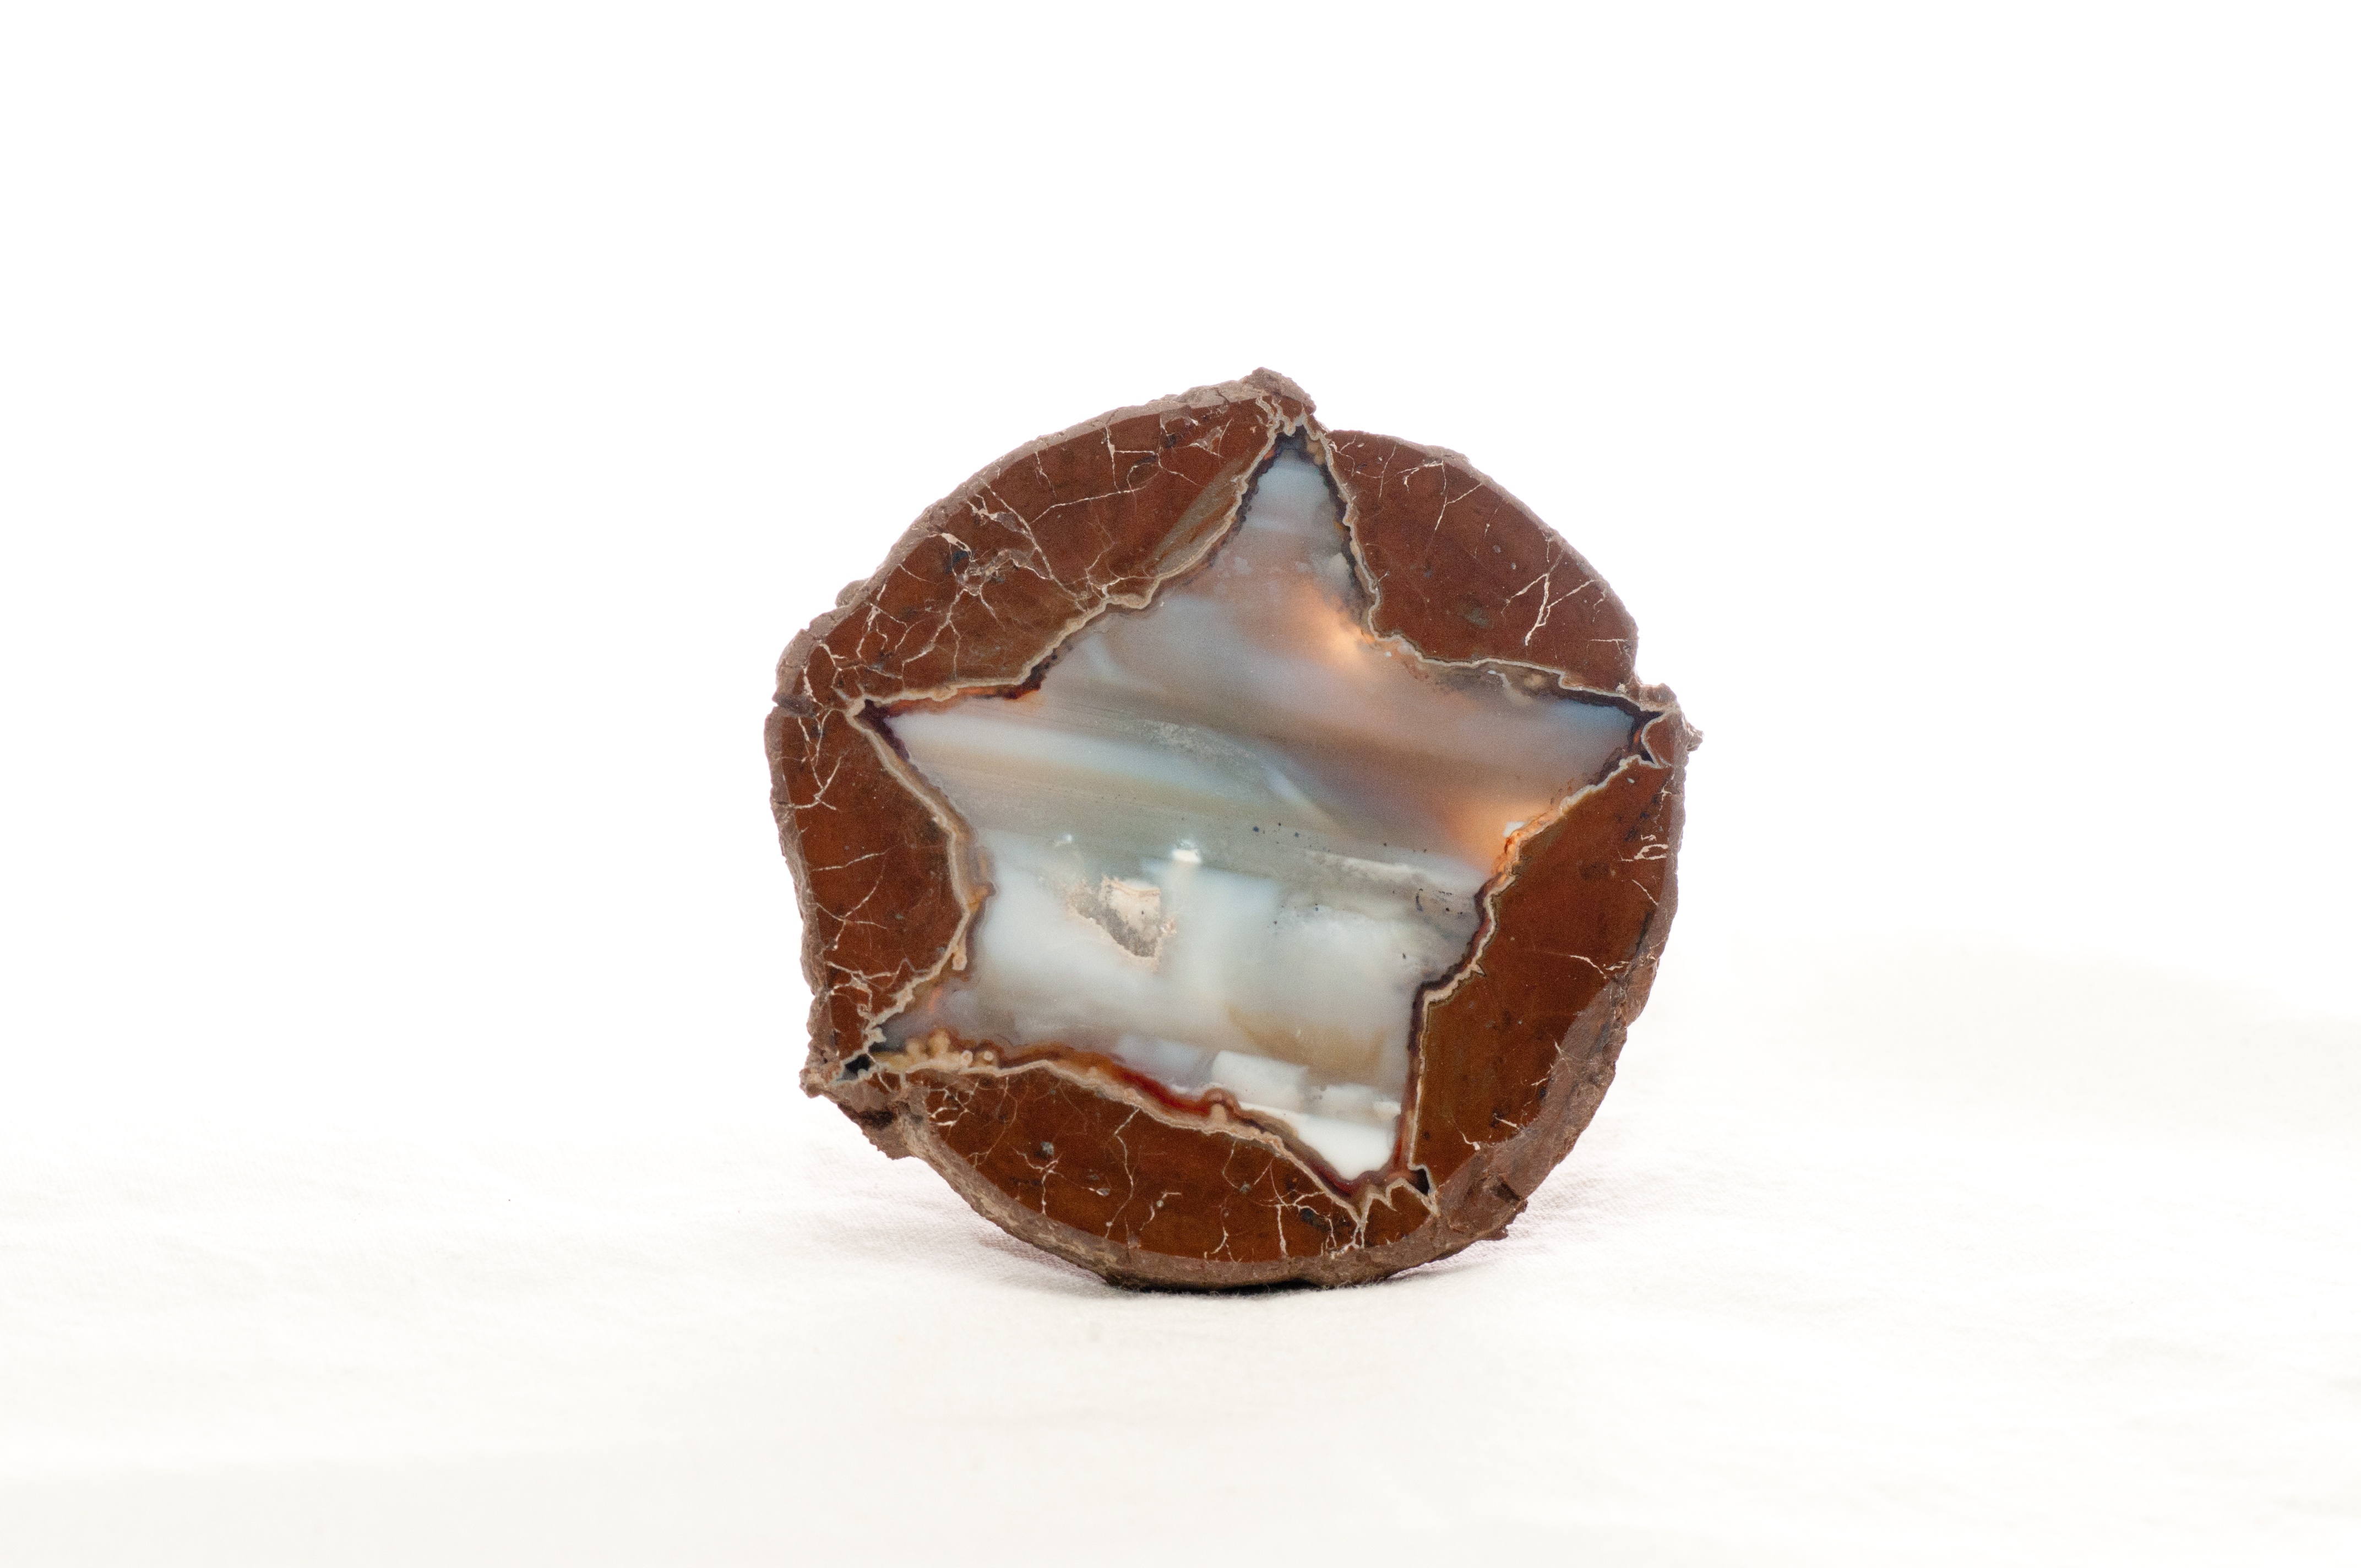 Reddish brown circle rock with a star shaped white fill on the inside. Polished and quite shiny.